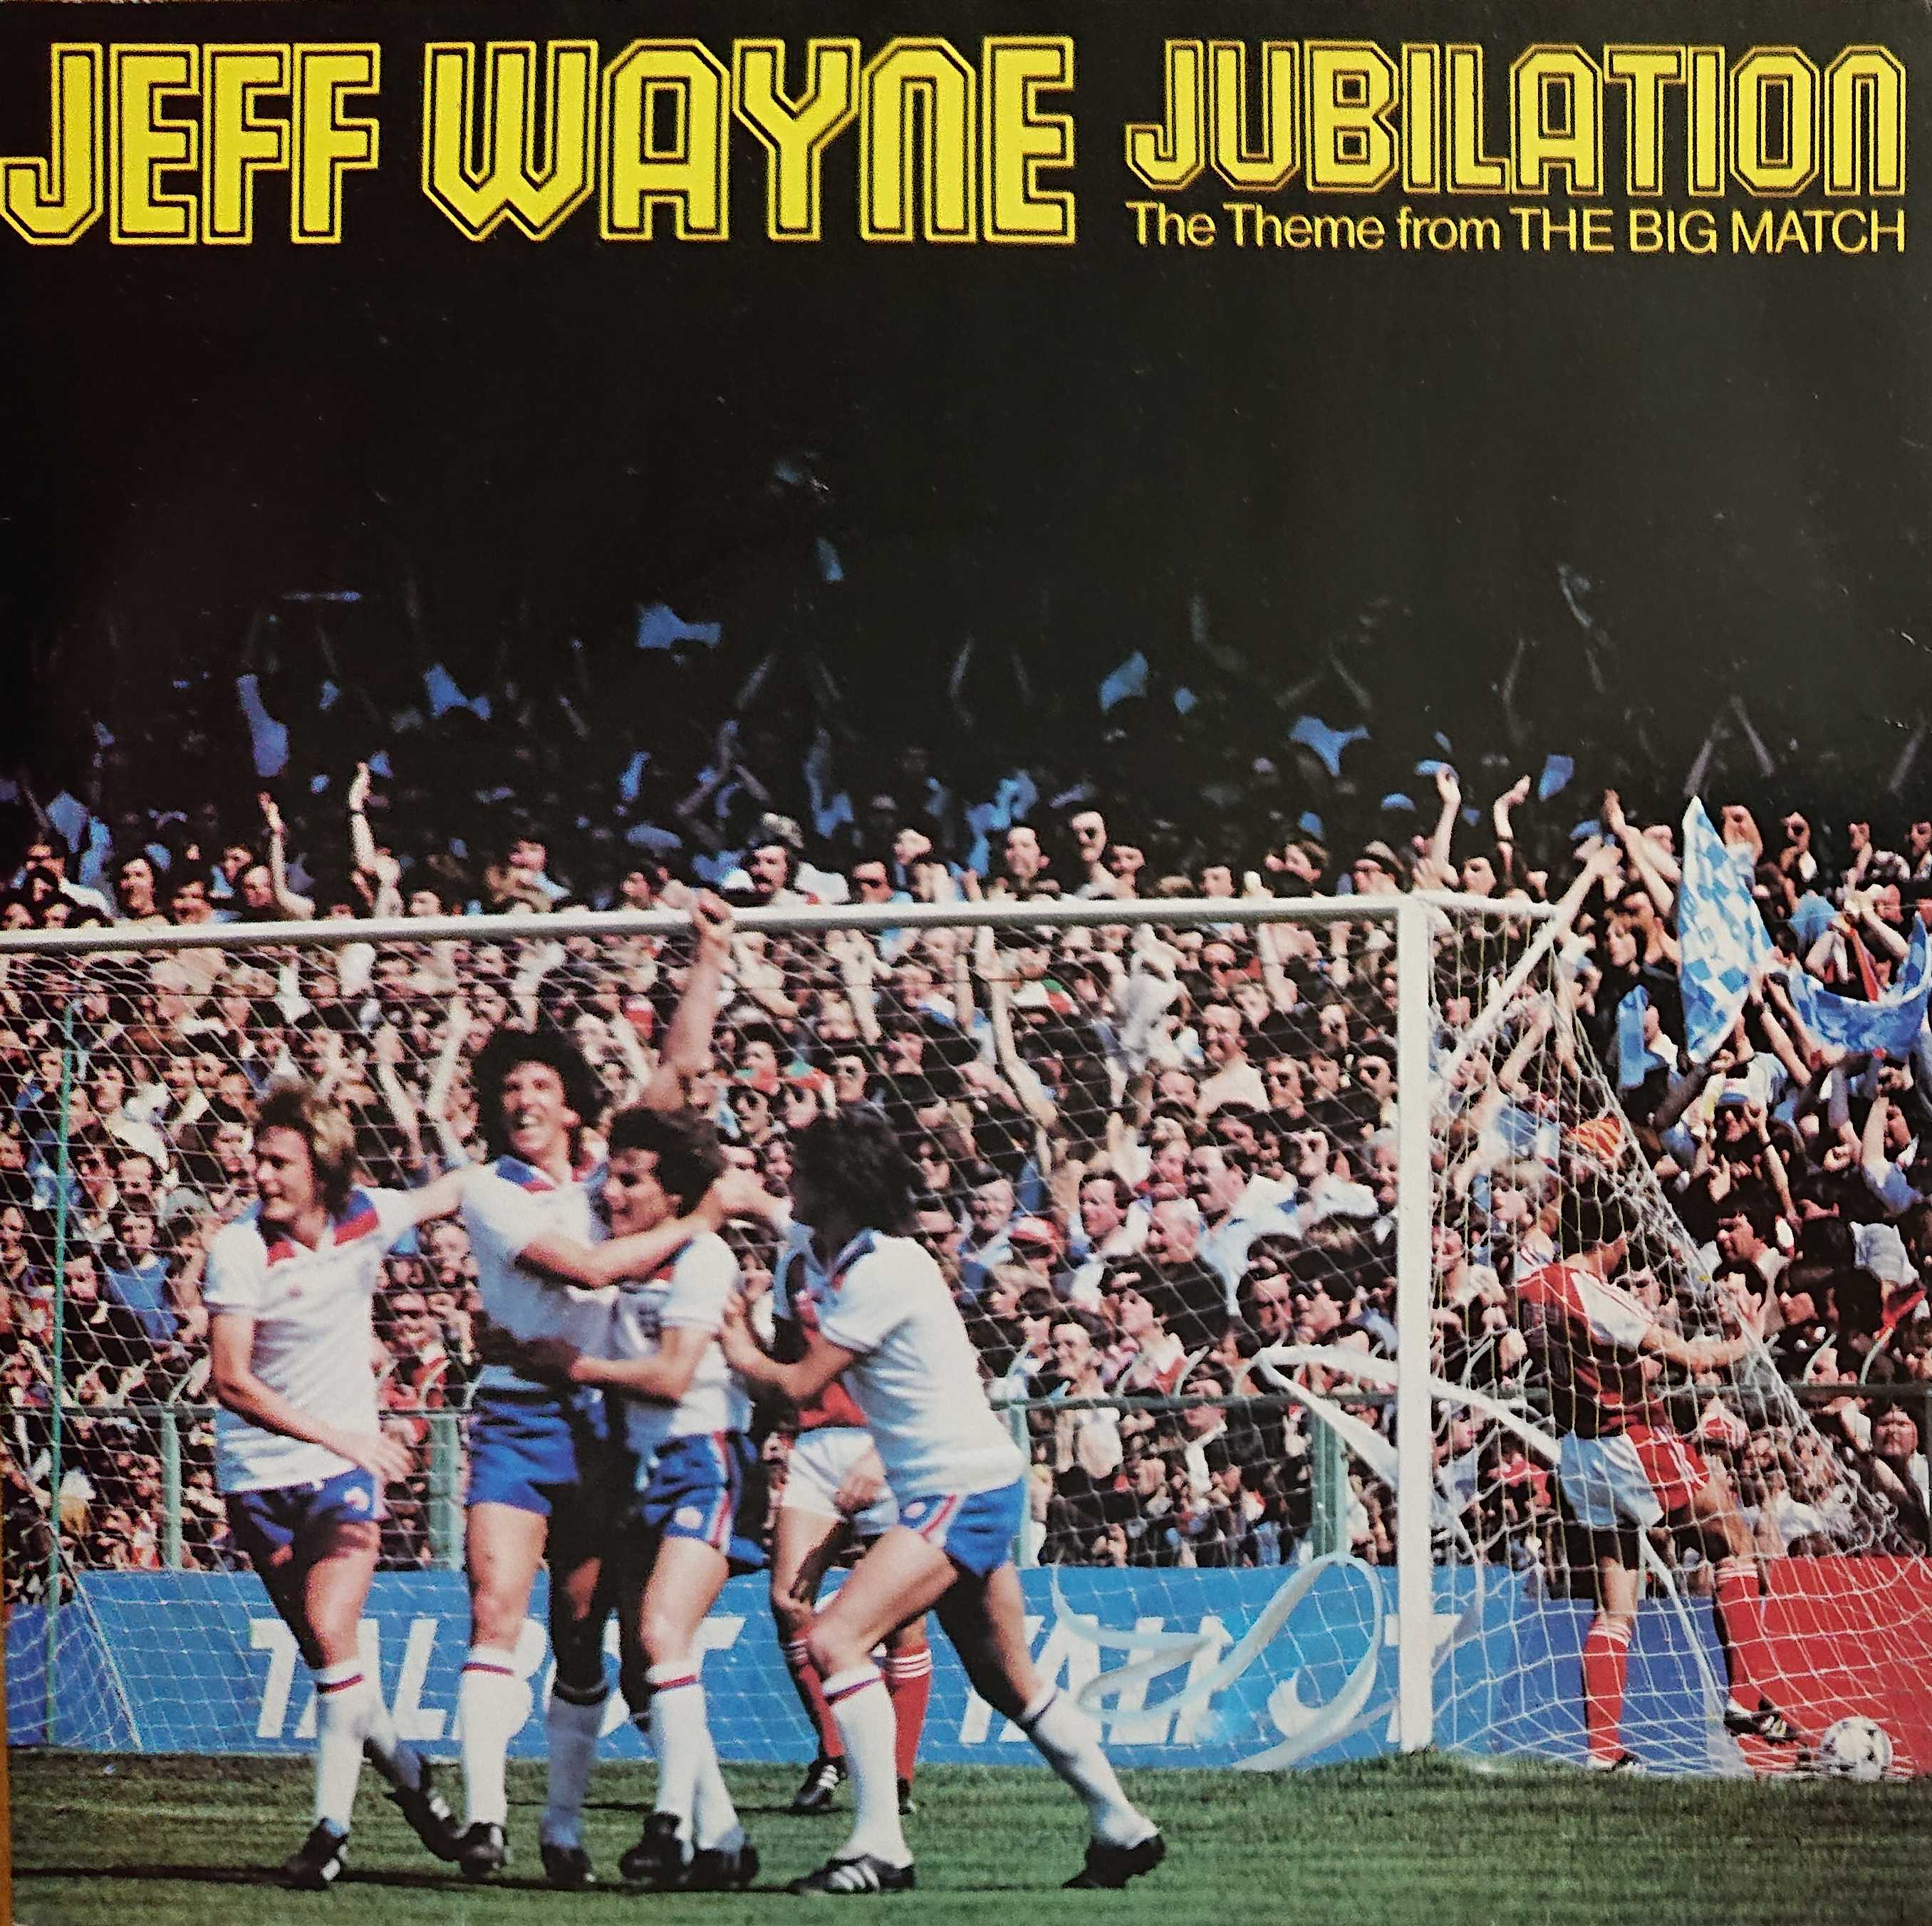 Picture of Jubilation (The big match) by artist Jeff Wayne from ITV, Channel 4 and Channel 5 singles library